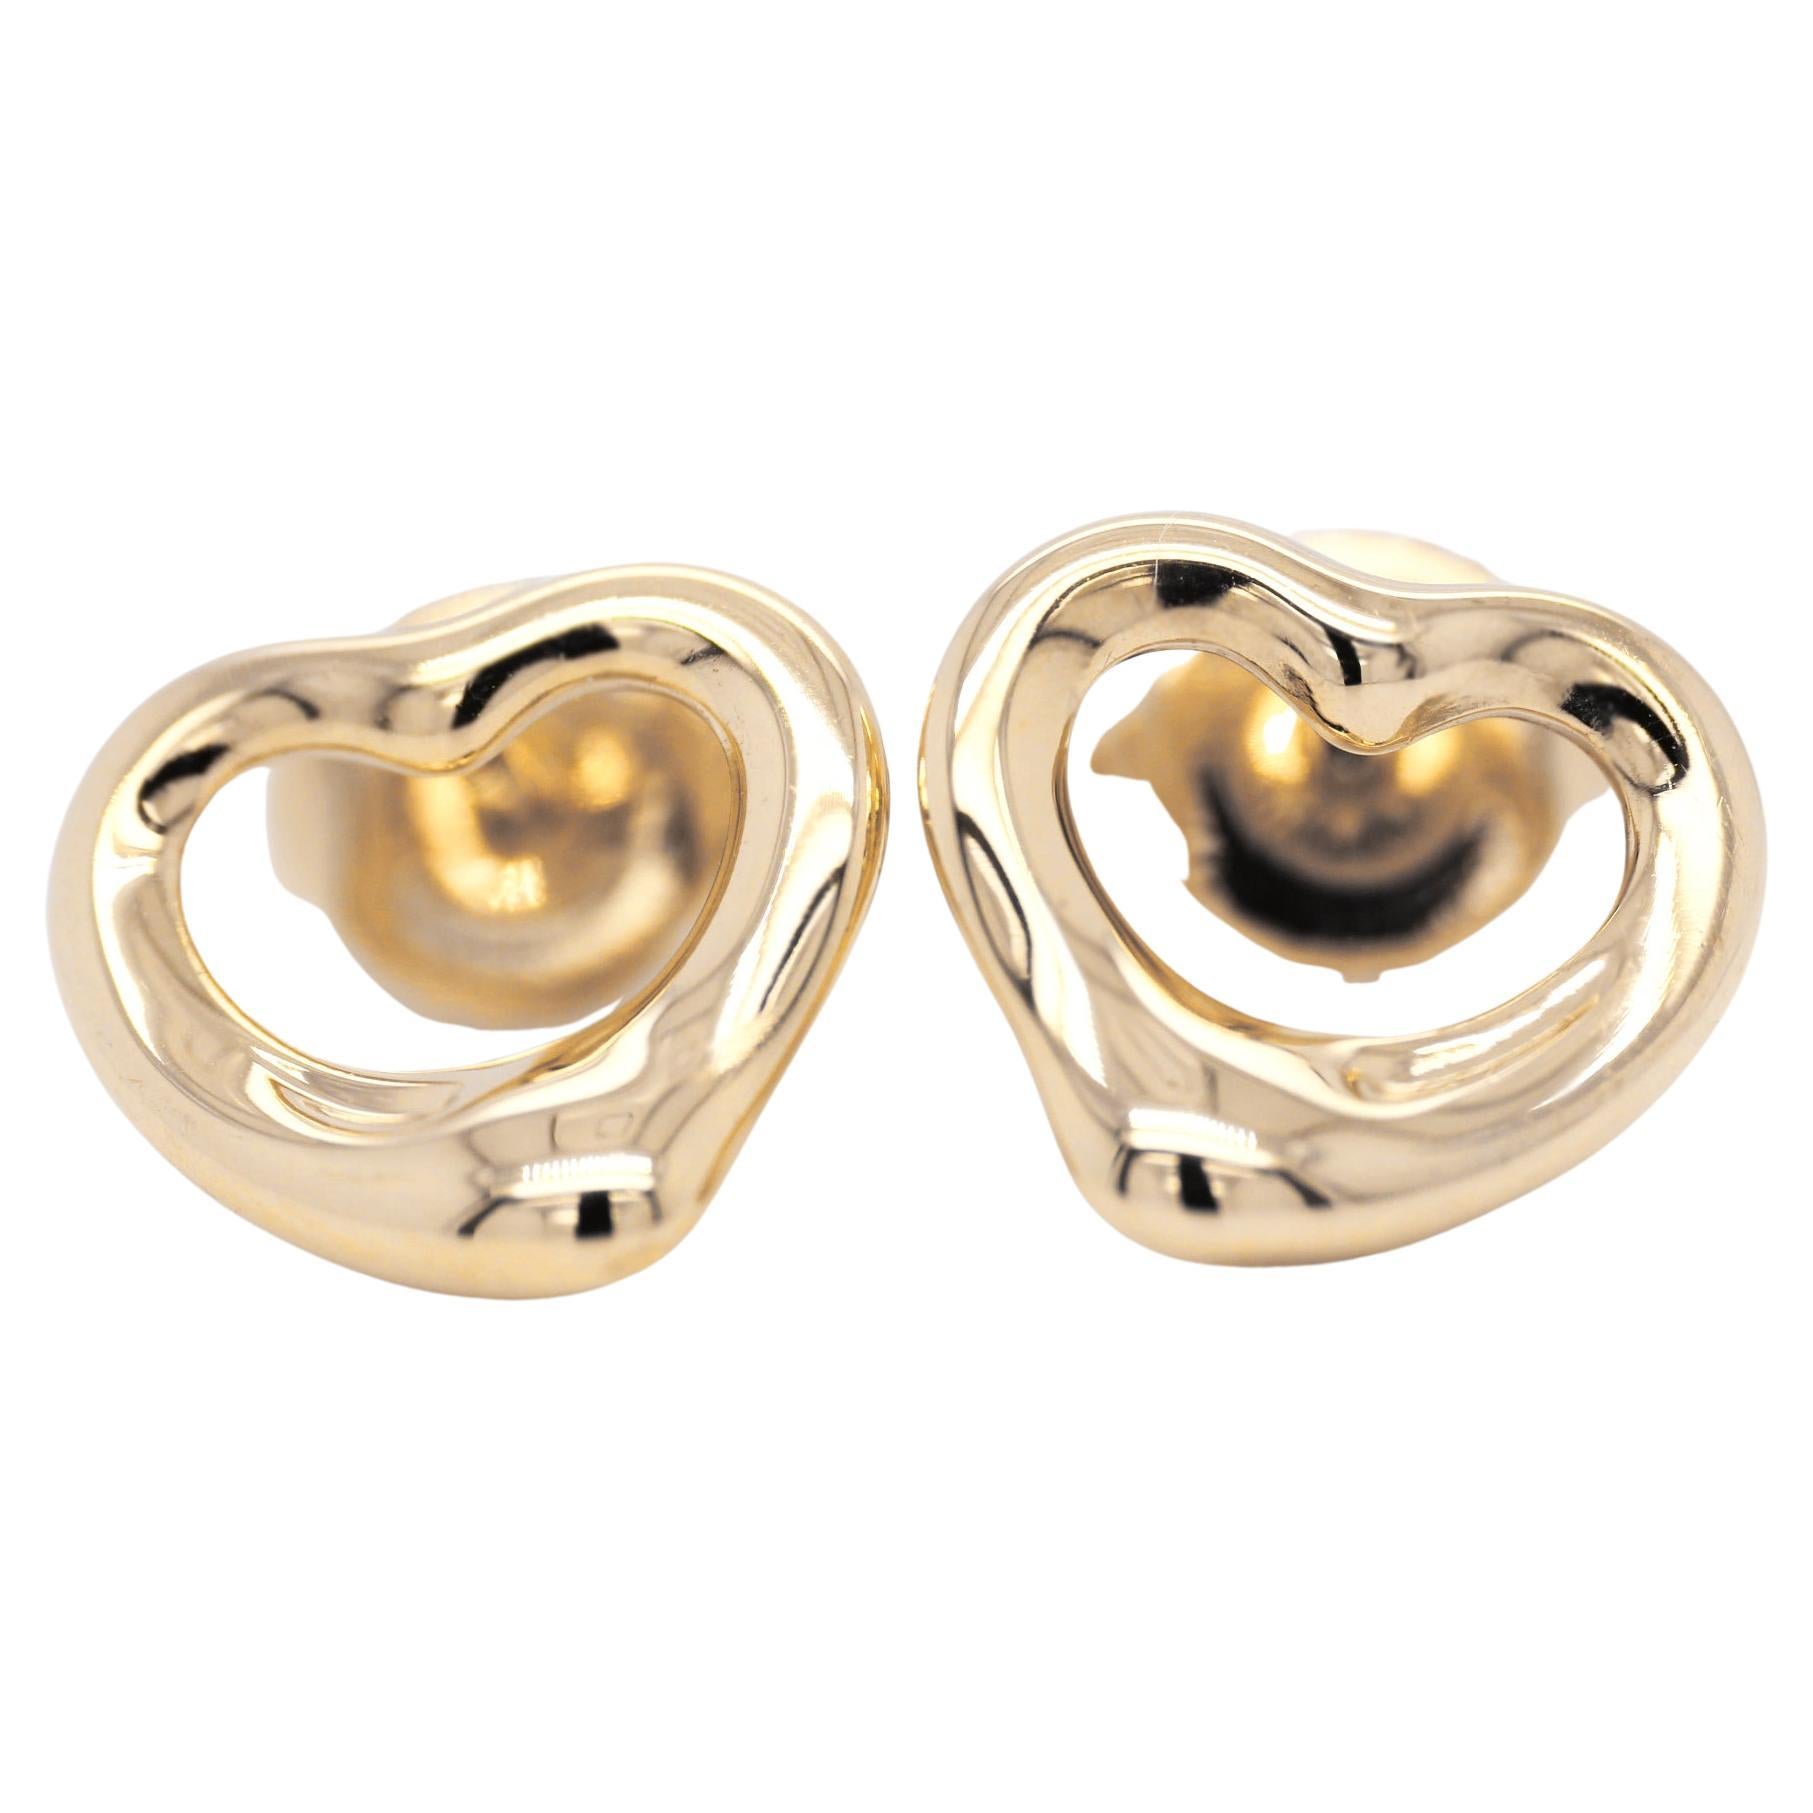 Polished 18ct yellow gold heart shaped earstuds by Elsa Peretti for Tiffany & Co.  Delicate and pretty.

Heart height: 10.7mm
Heart width: 10.7mm

Stamped on the underside: 'TIFFANY & CO.  @ Elsa Peretti  750  SPAIN'

Weight including butterfly